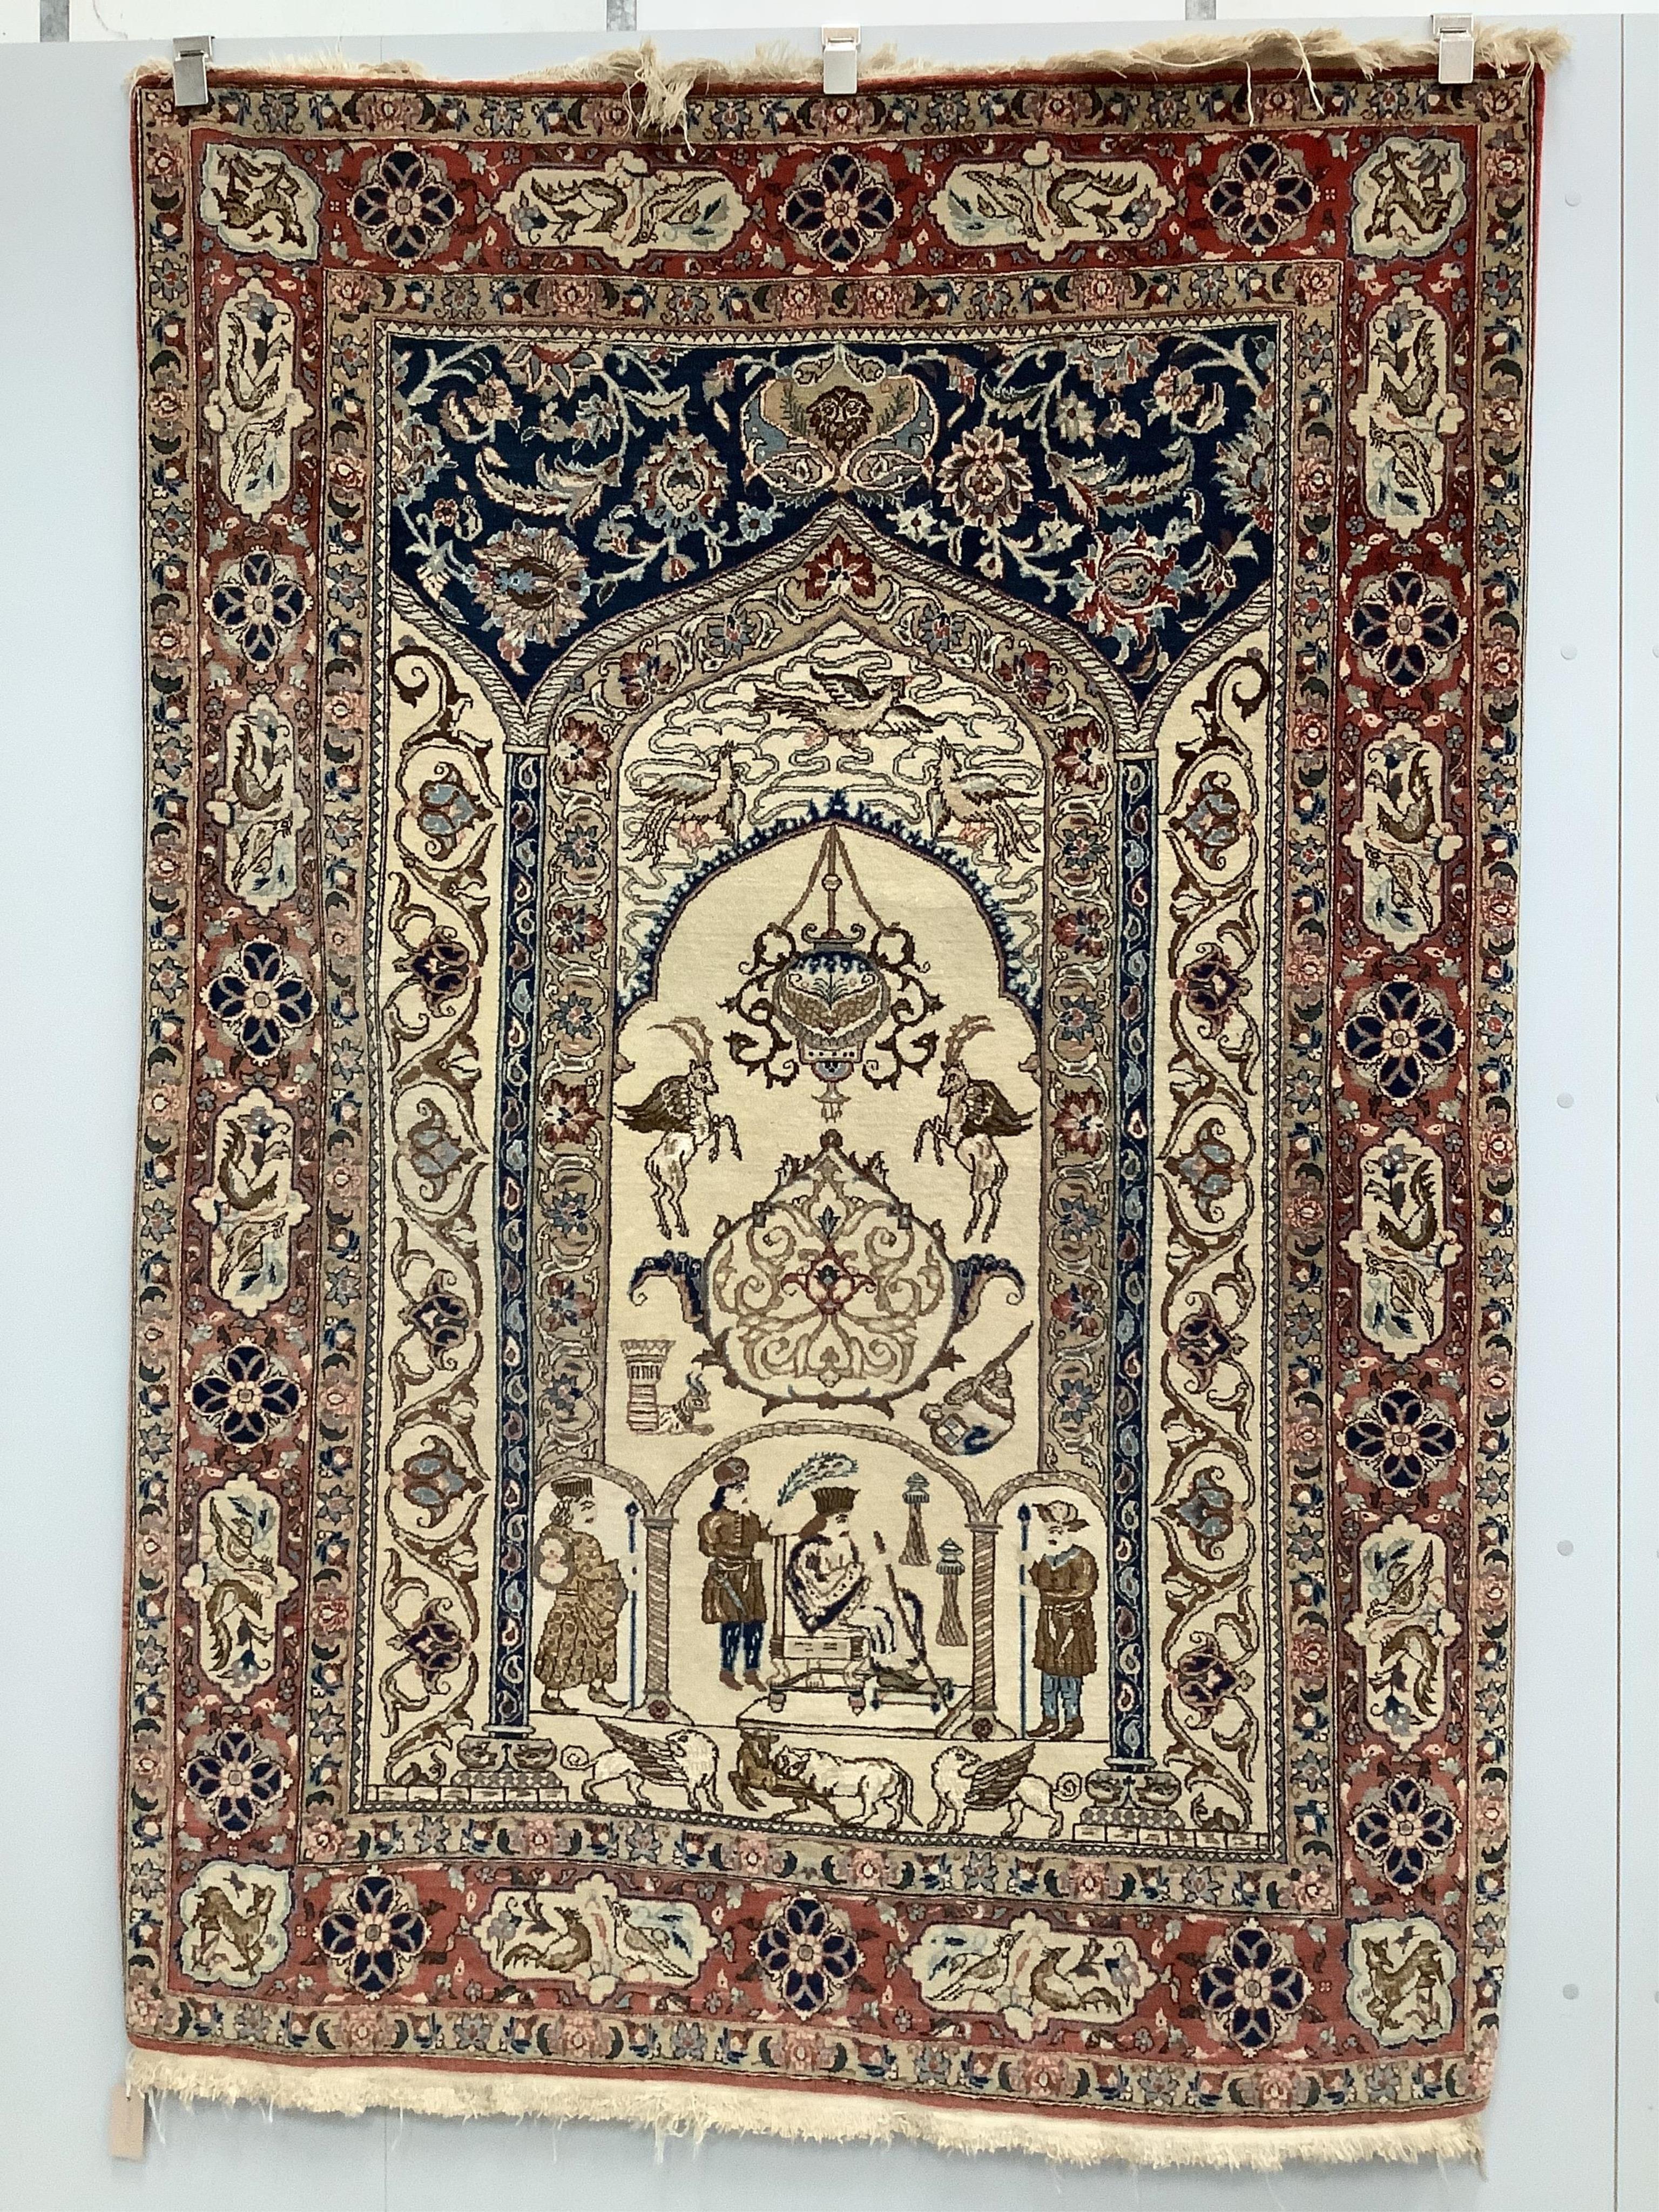 An unusual Isphahan pictorial prayer rug, woven with figures and animals, 195 x 140cm. Condition - good